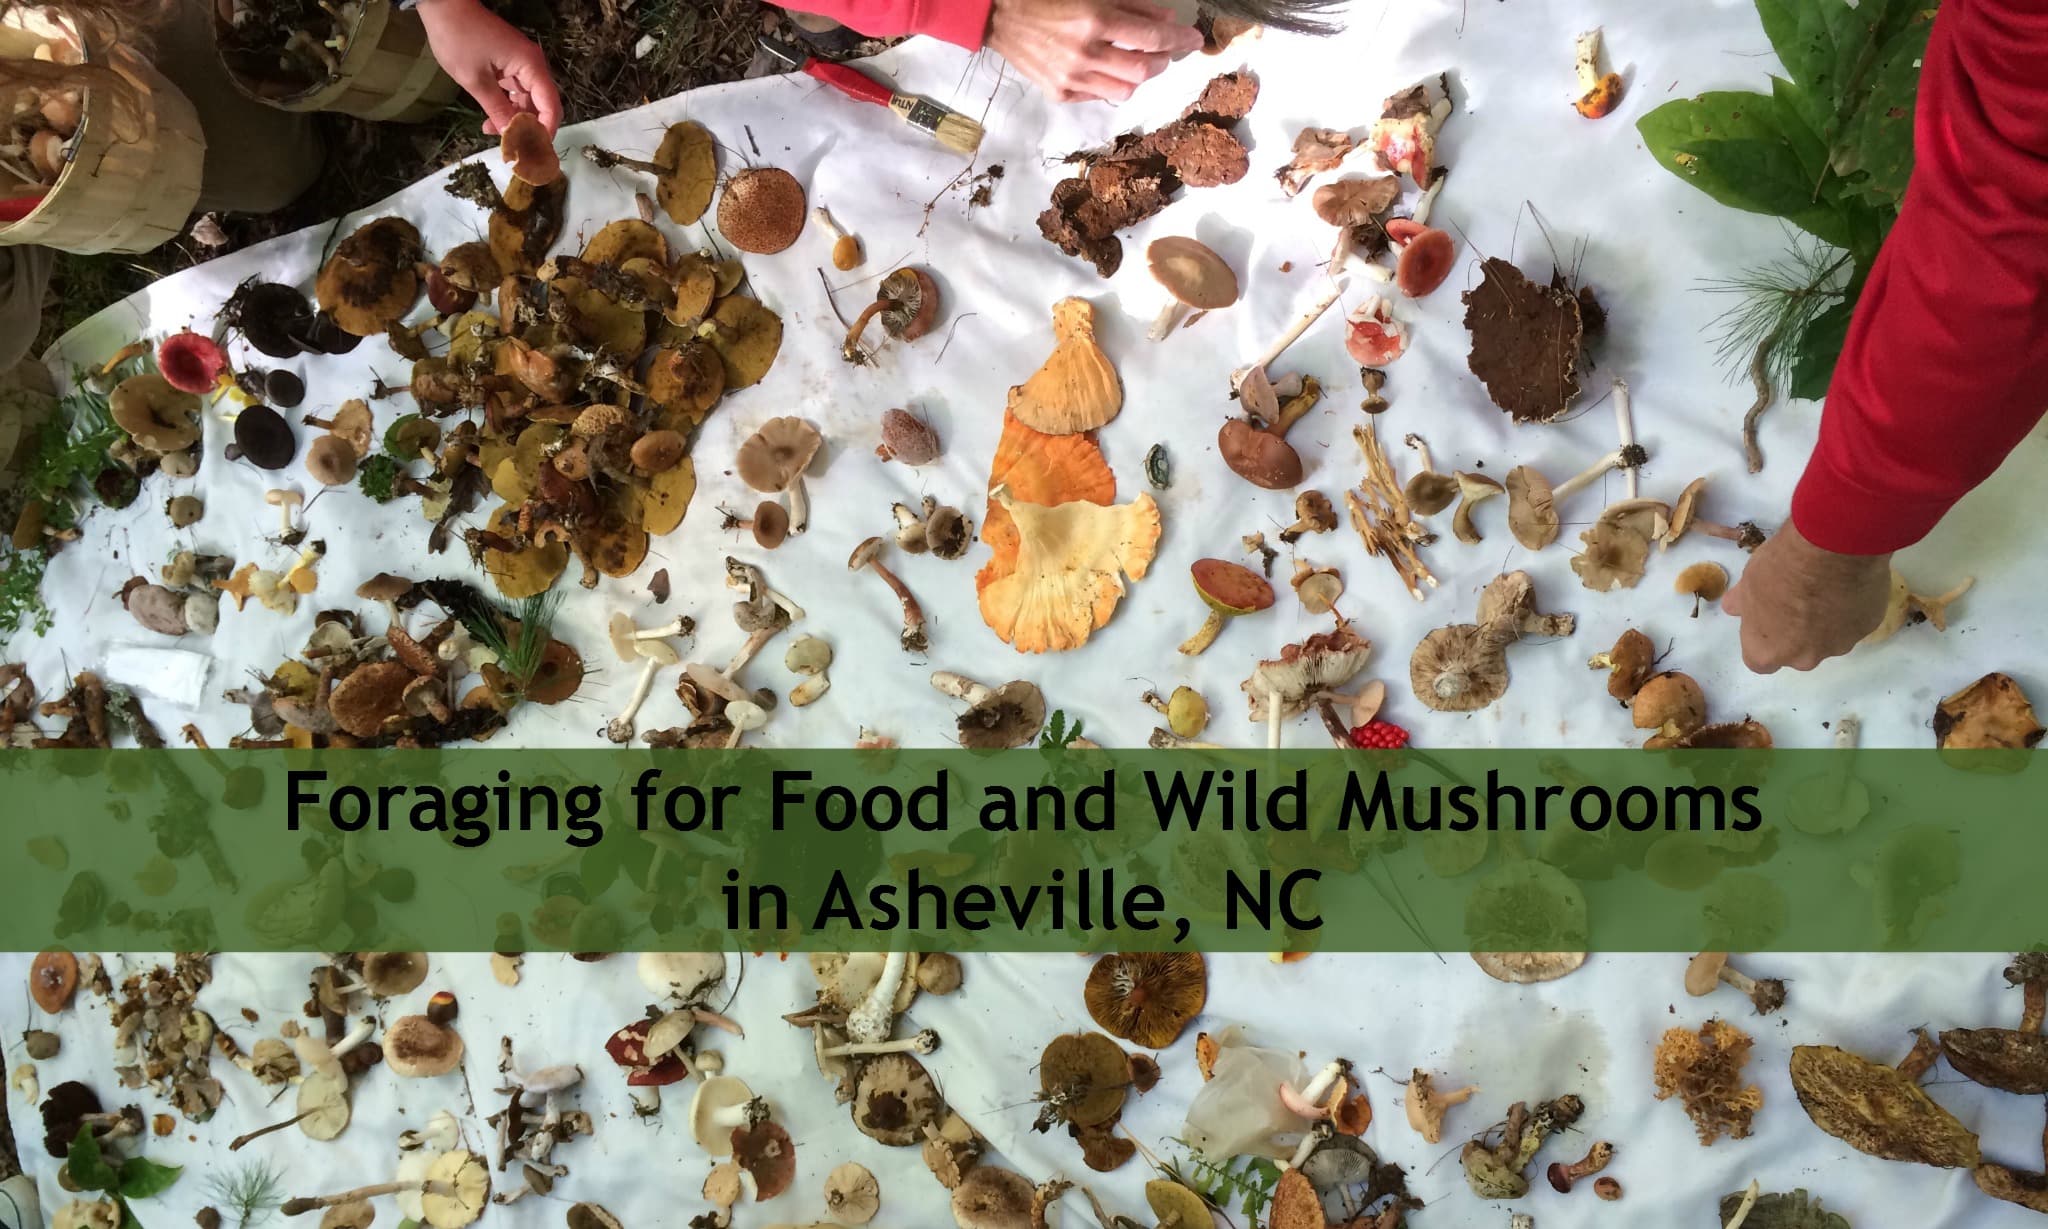 Foraging for Food and Finding Wild Mushrooms in Asheville, NC